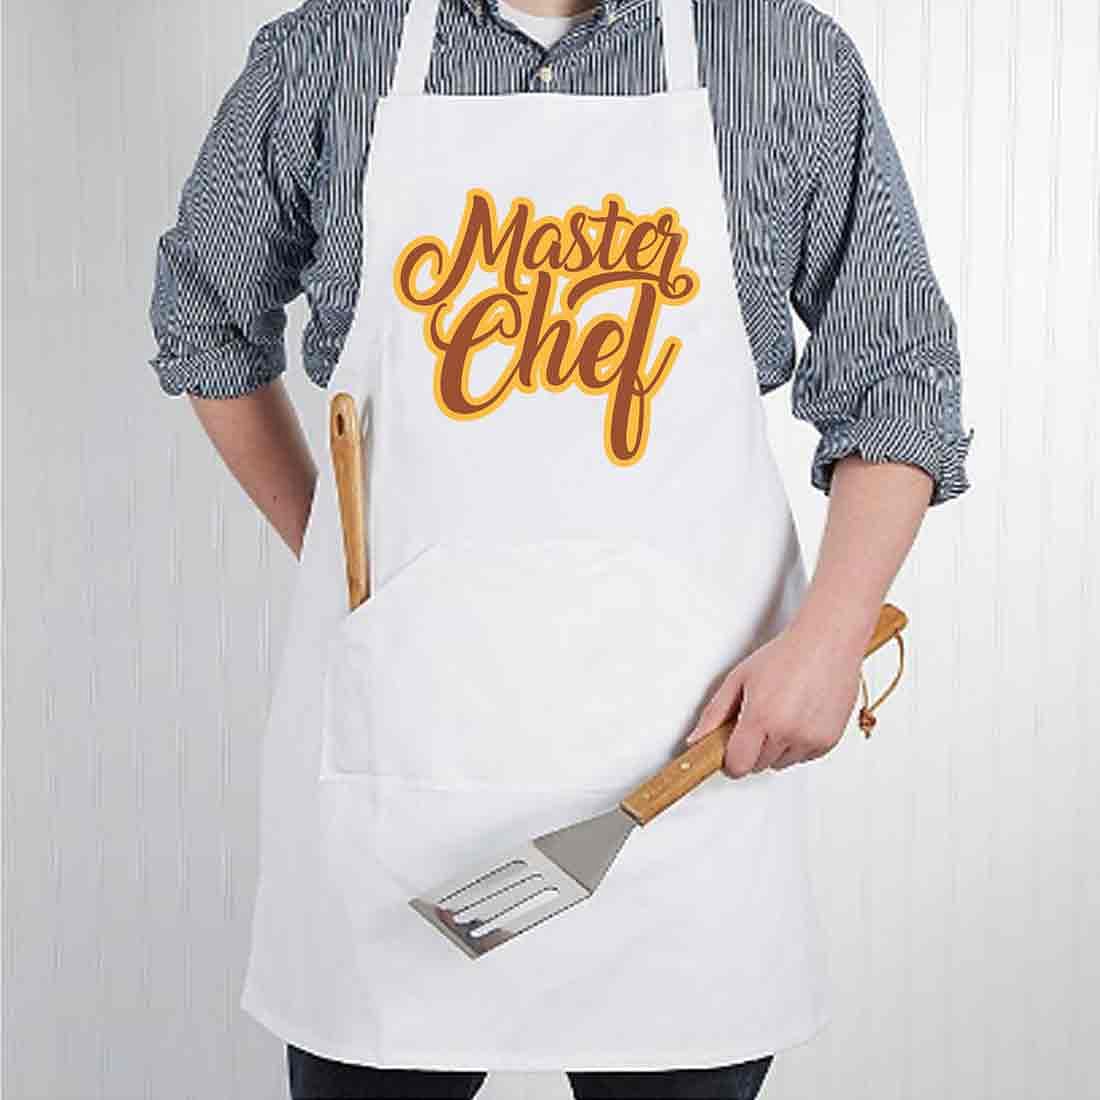 Apron For Kitchen for Women Baking Cooking - Master Chef Nutcase